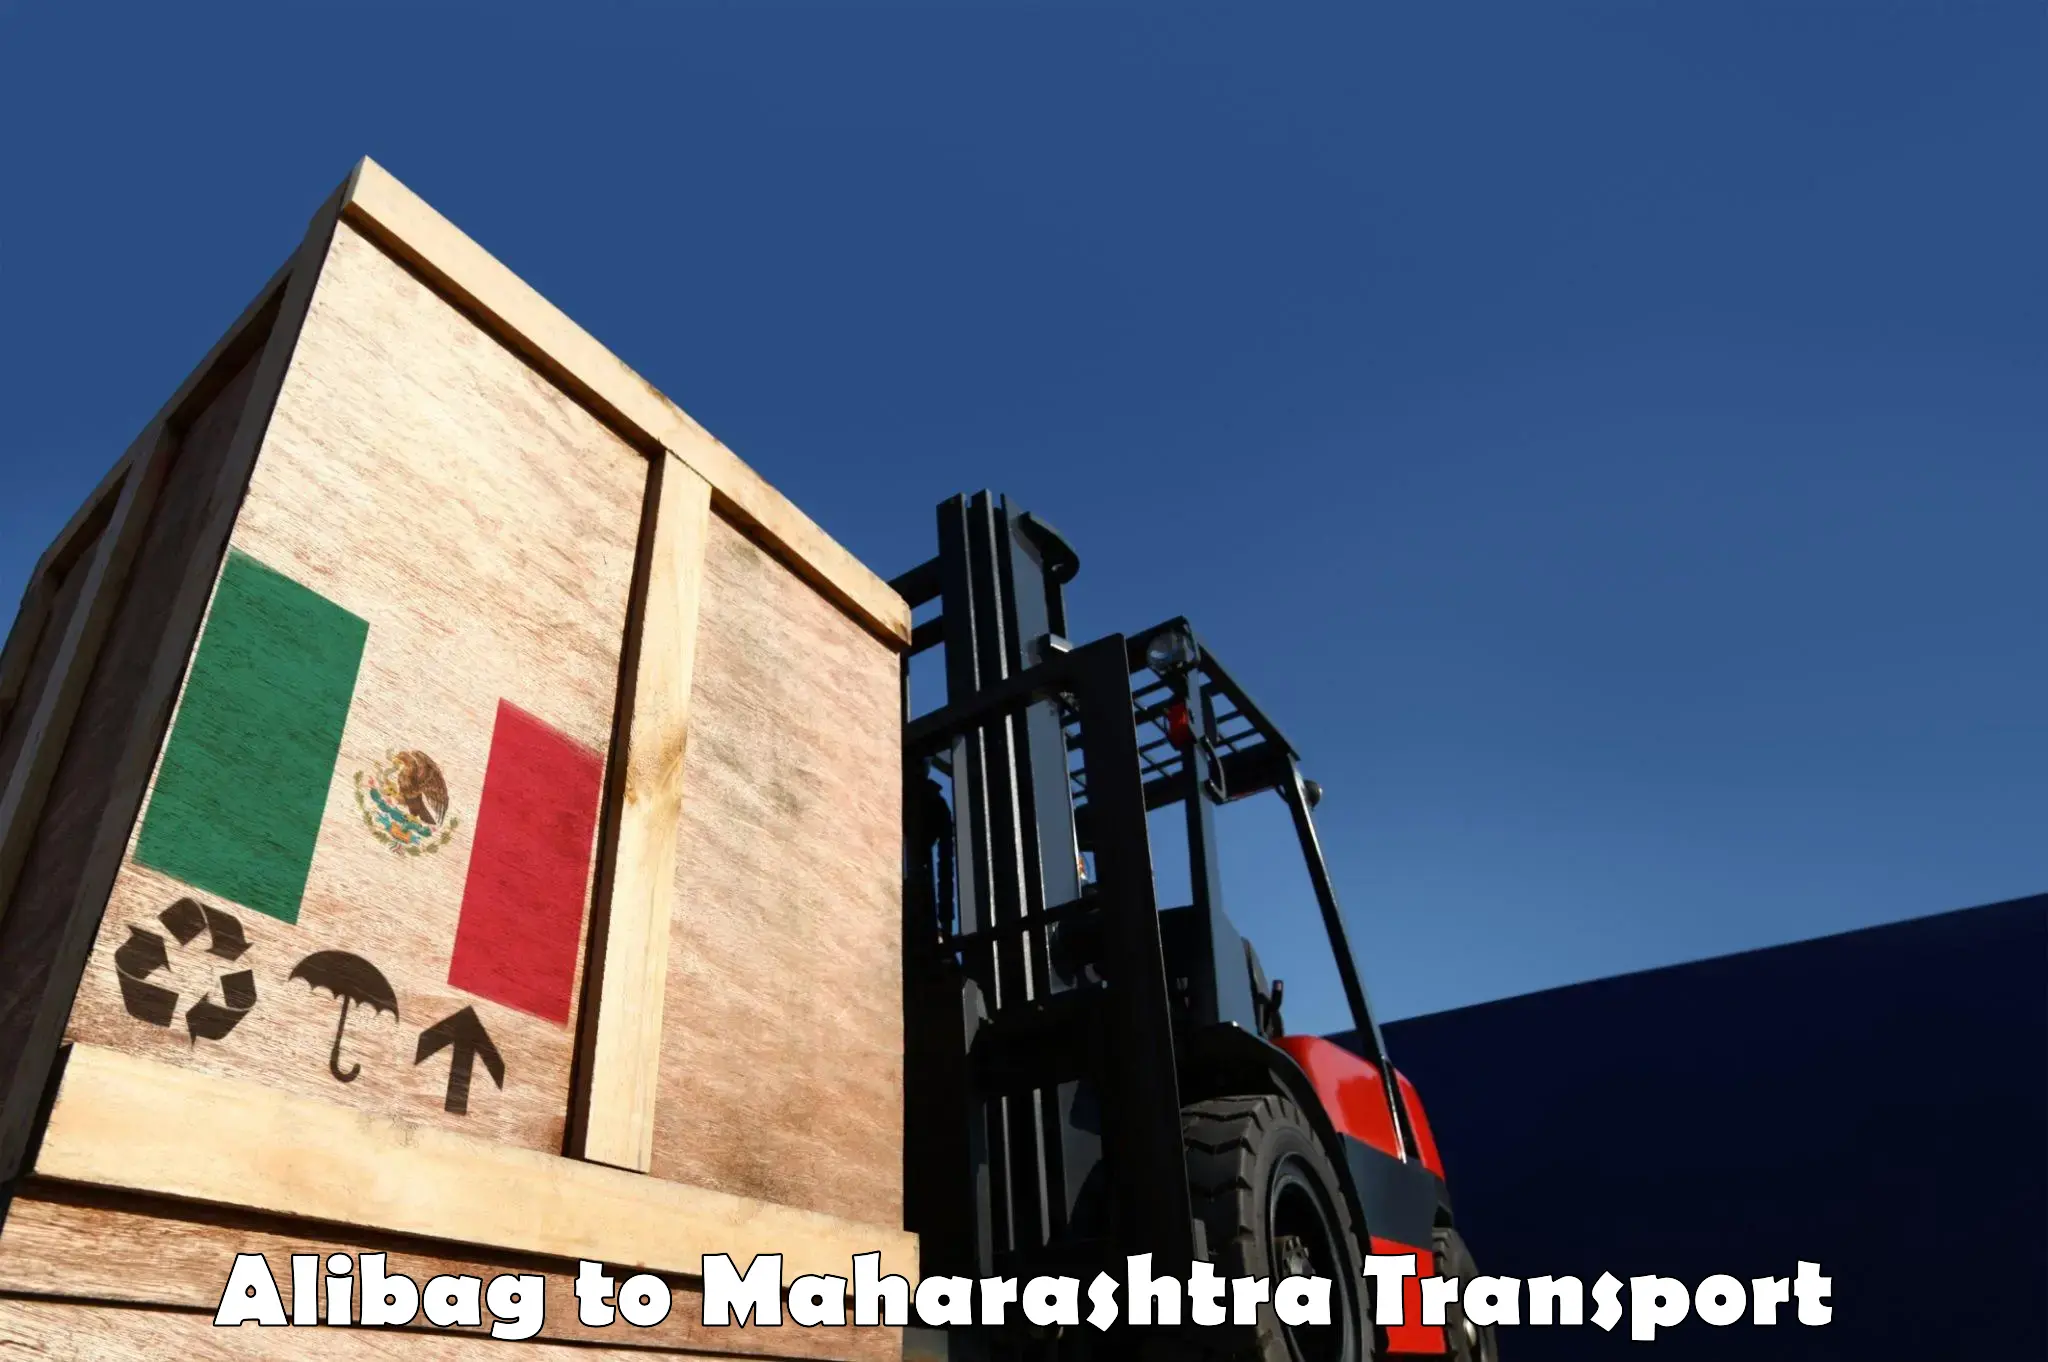 Transport bike from one state to another Alibag to IIT Mumbai